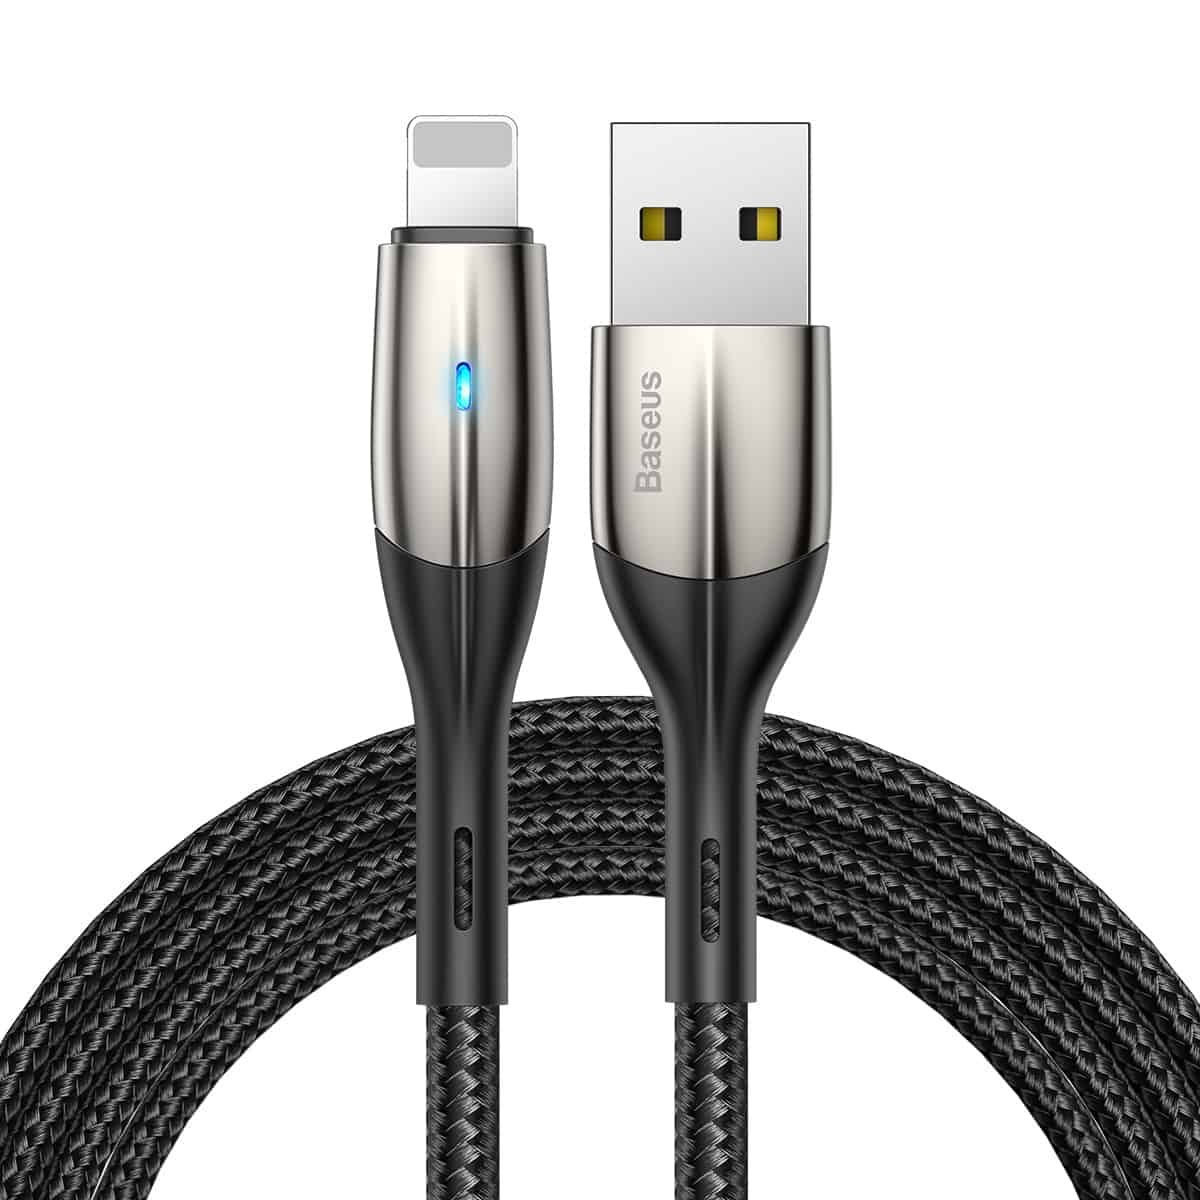 Baseus Nylon USB Lightning Cable Fast Charging Charger Cord For iPhone iPad